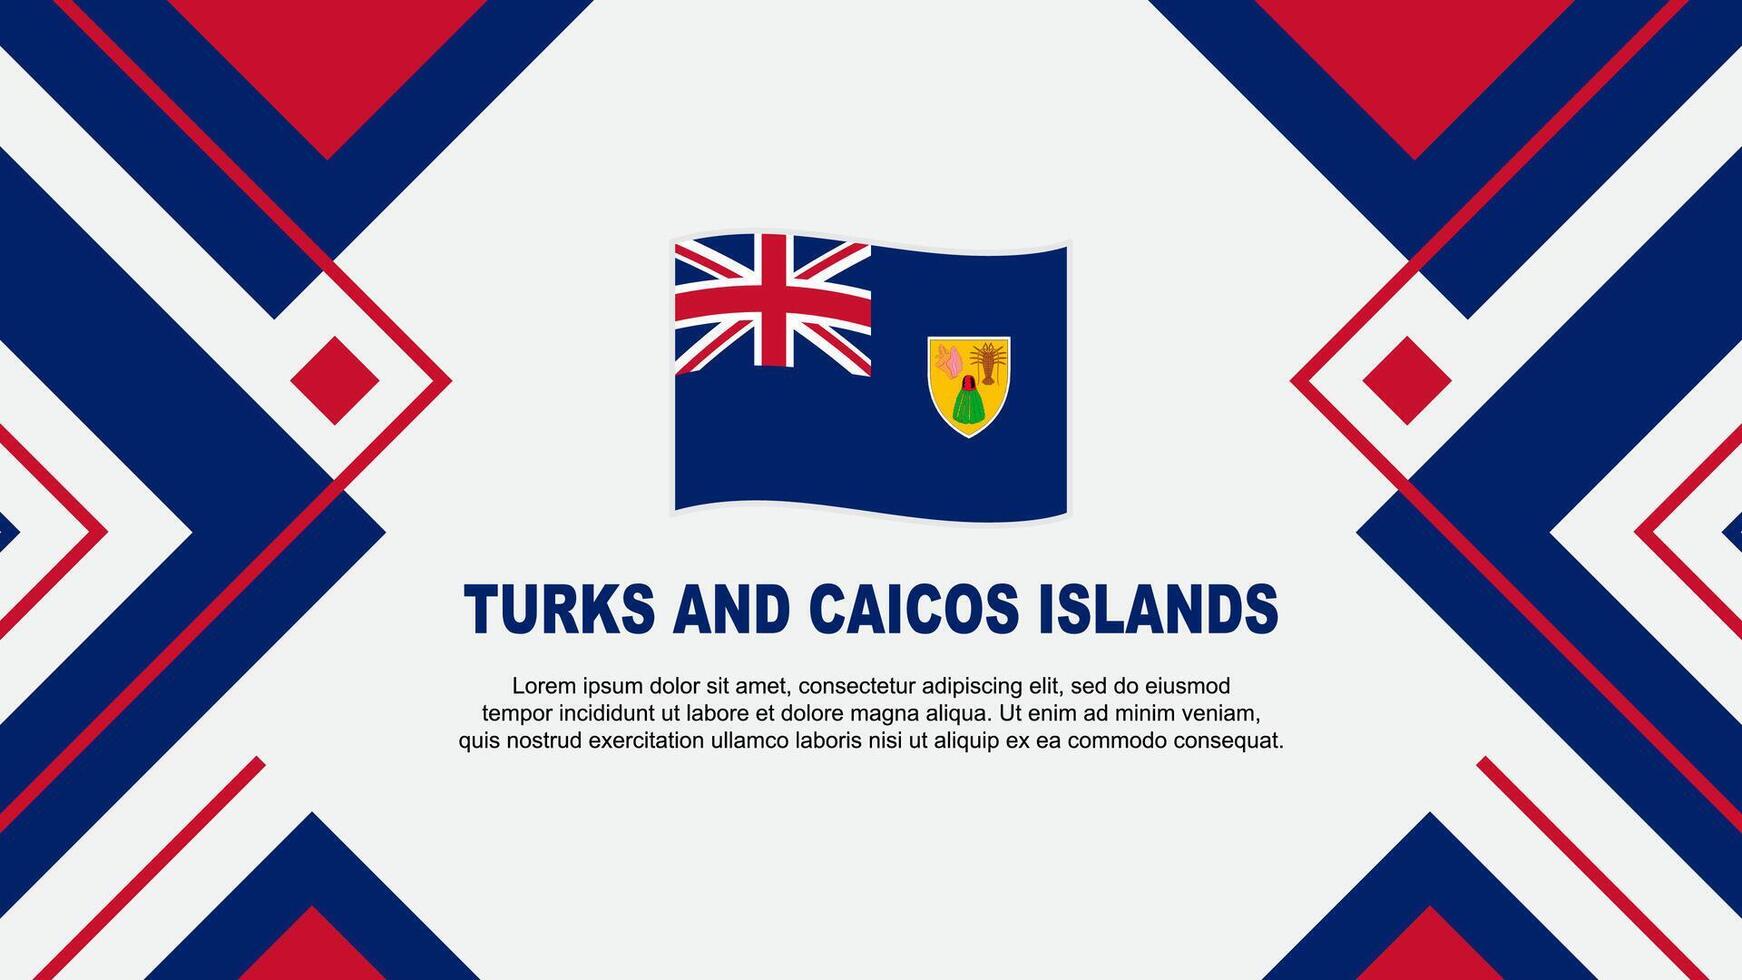 Turks And Caicos Islands Flag Abstract Background Design Template. Turks And Caicos Islands Independence Day Banner Wallpaper Vector Illustration. Illustration